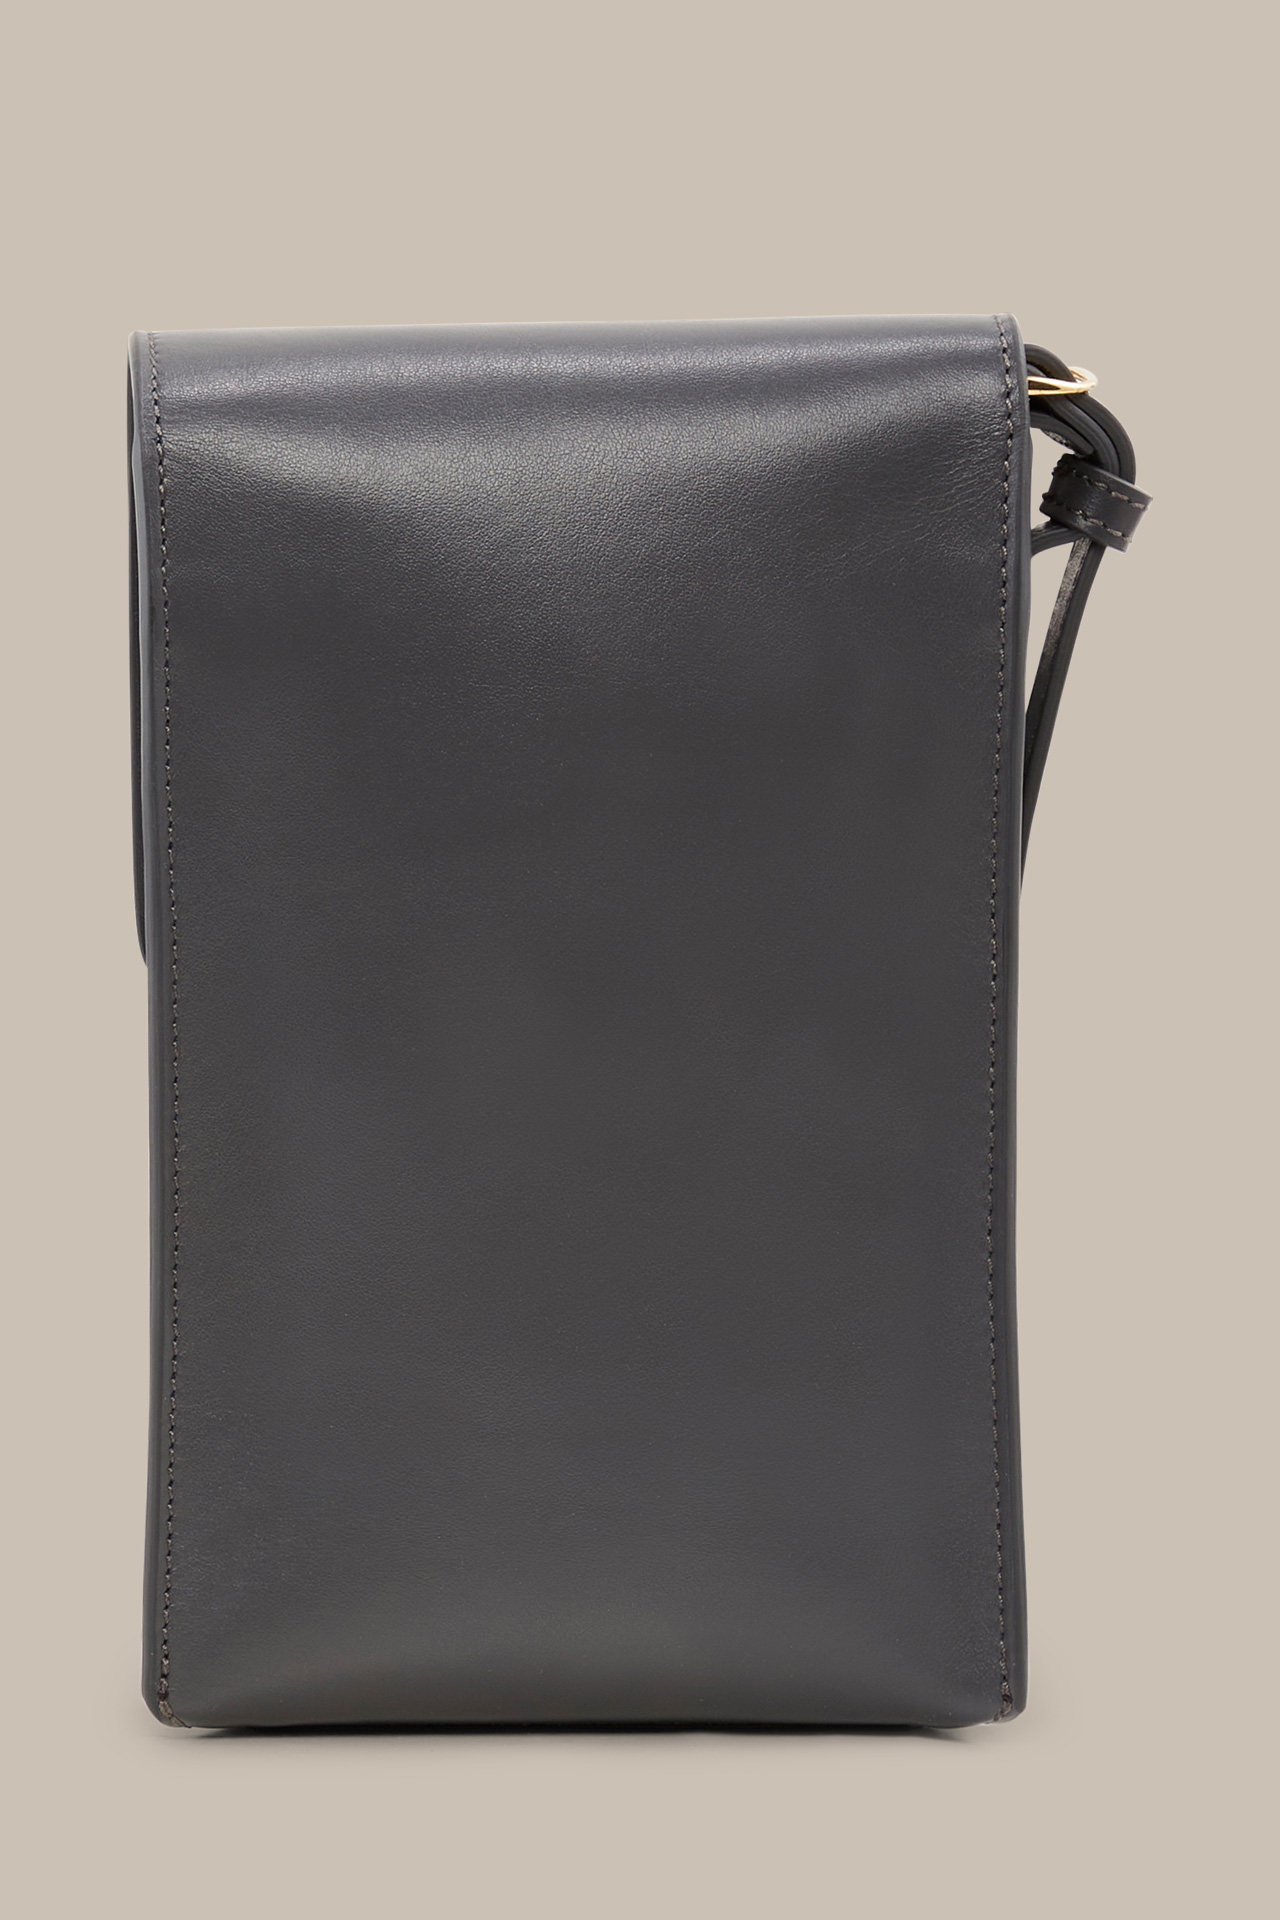 Crossbody Bag in Nappa Leather in Anthracite